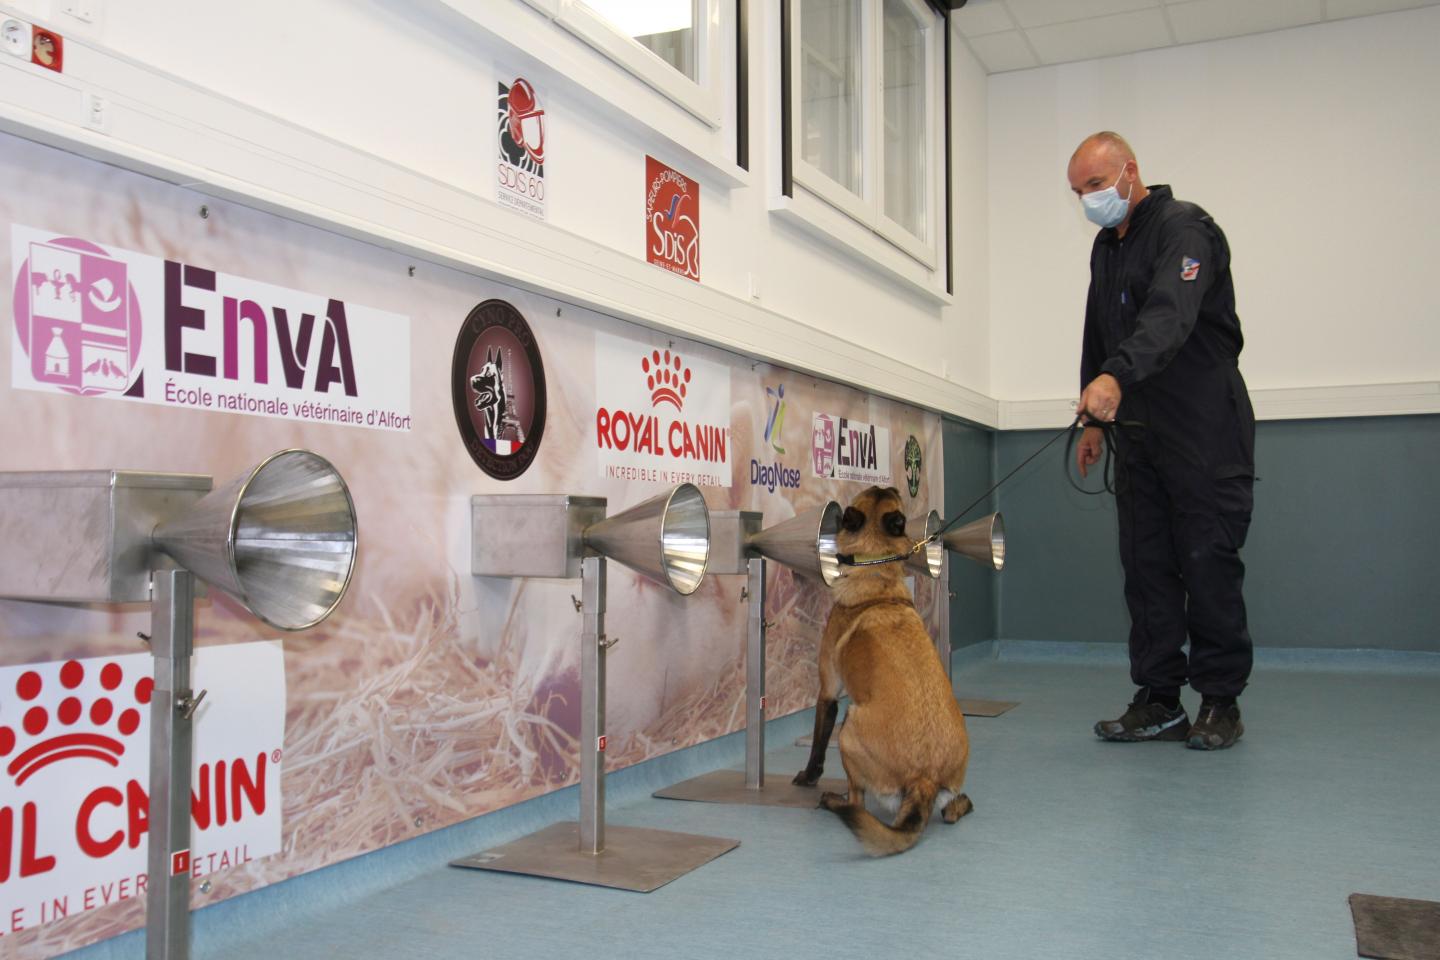 Trained dogs might be able to detect people infected with COVID-19